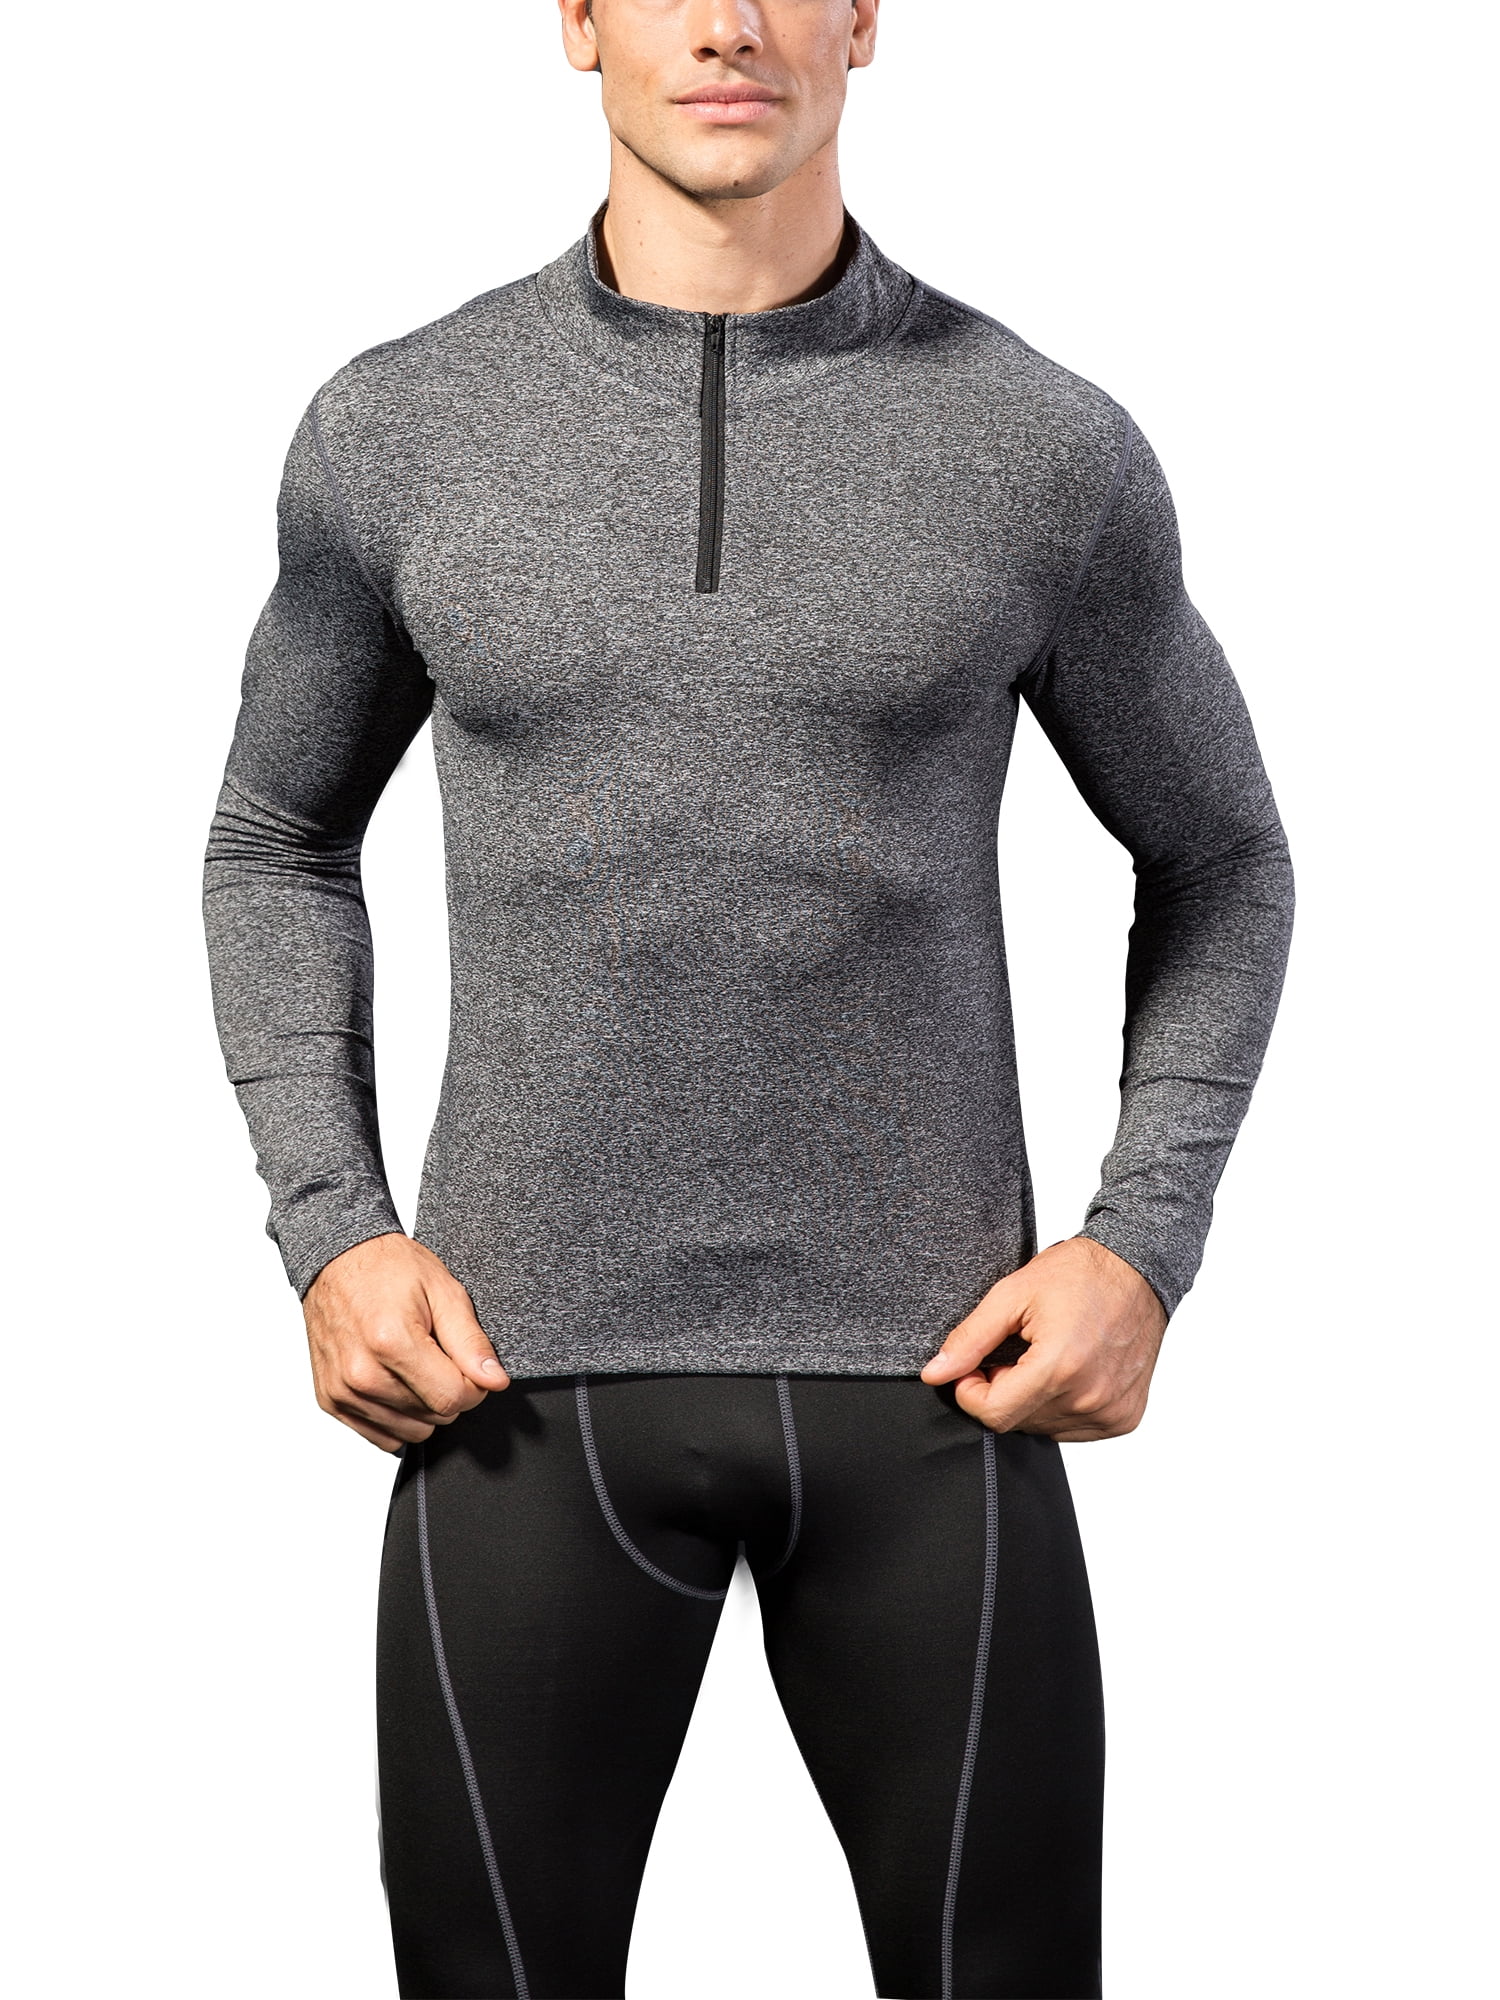 Mens Compression Under Shirt Base Layer Athleisure Tops Sports T-Shirts Gym Wear 